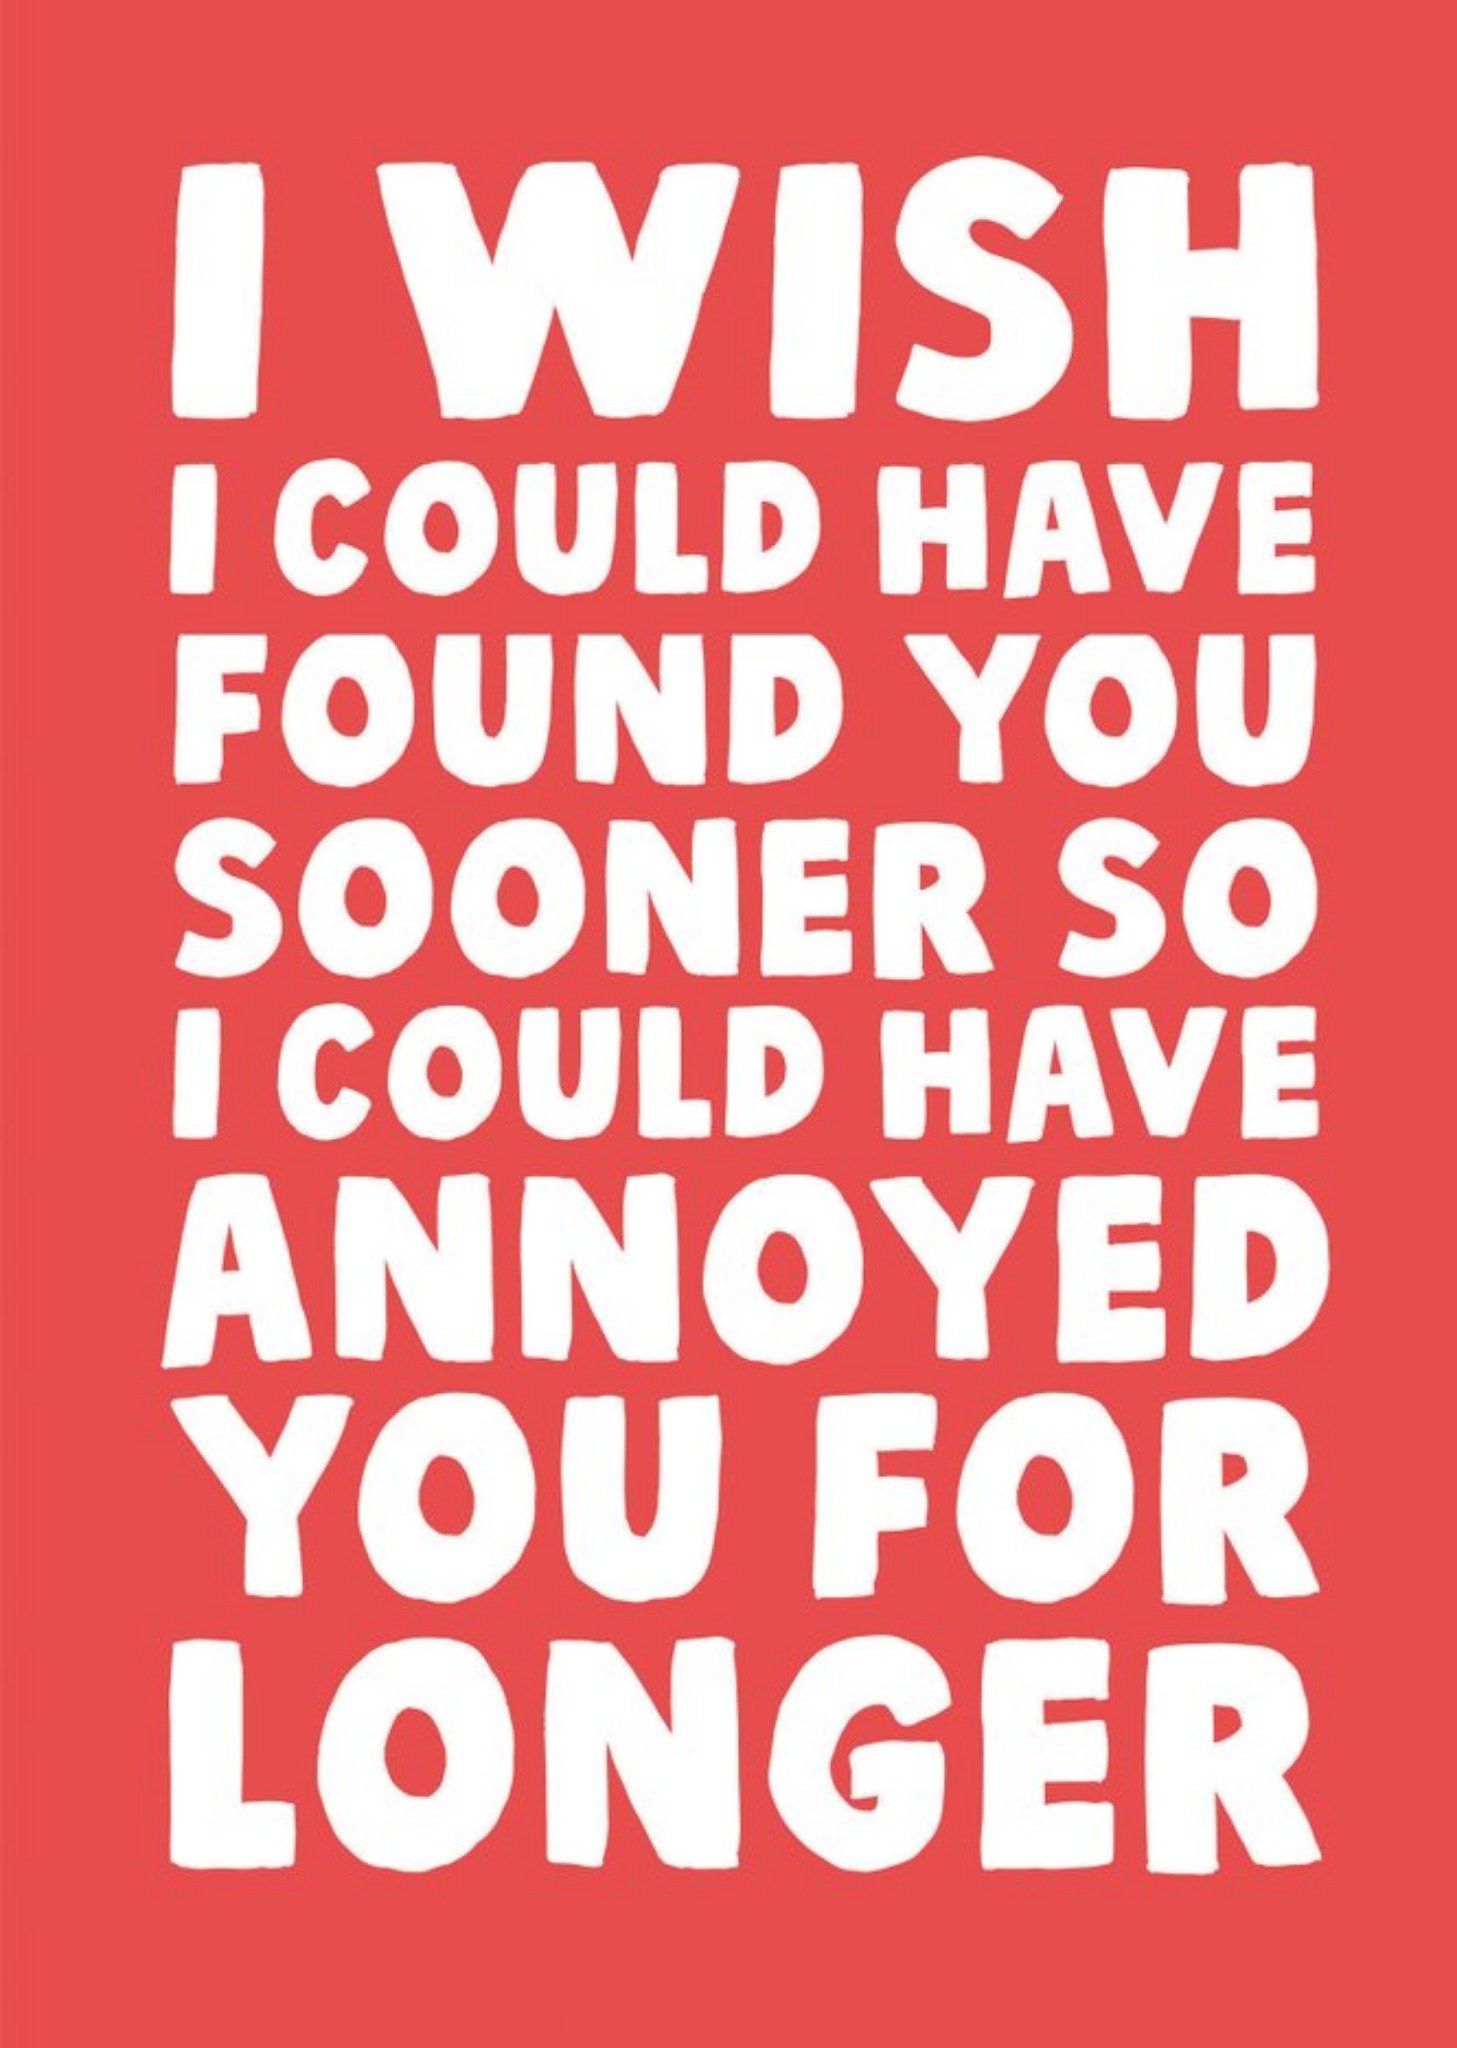 Moonpig I Wish I Could Have Found You Sooner So I Could Have Annoyed You For Longer Card Ecard